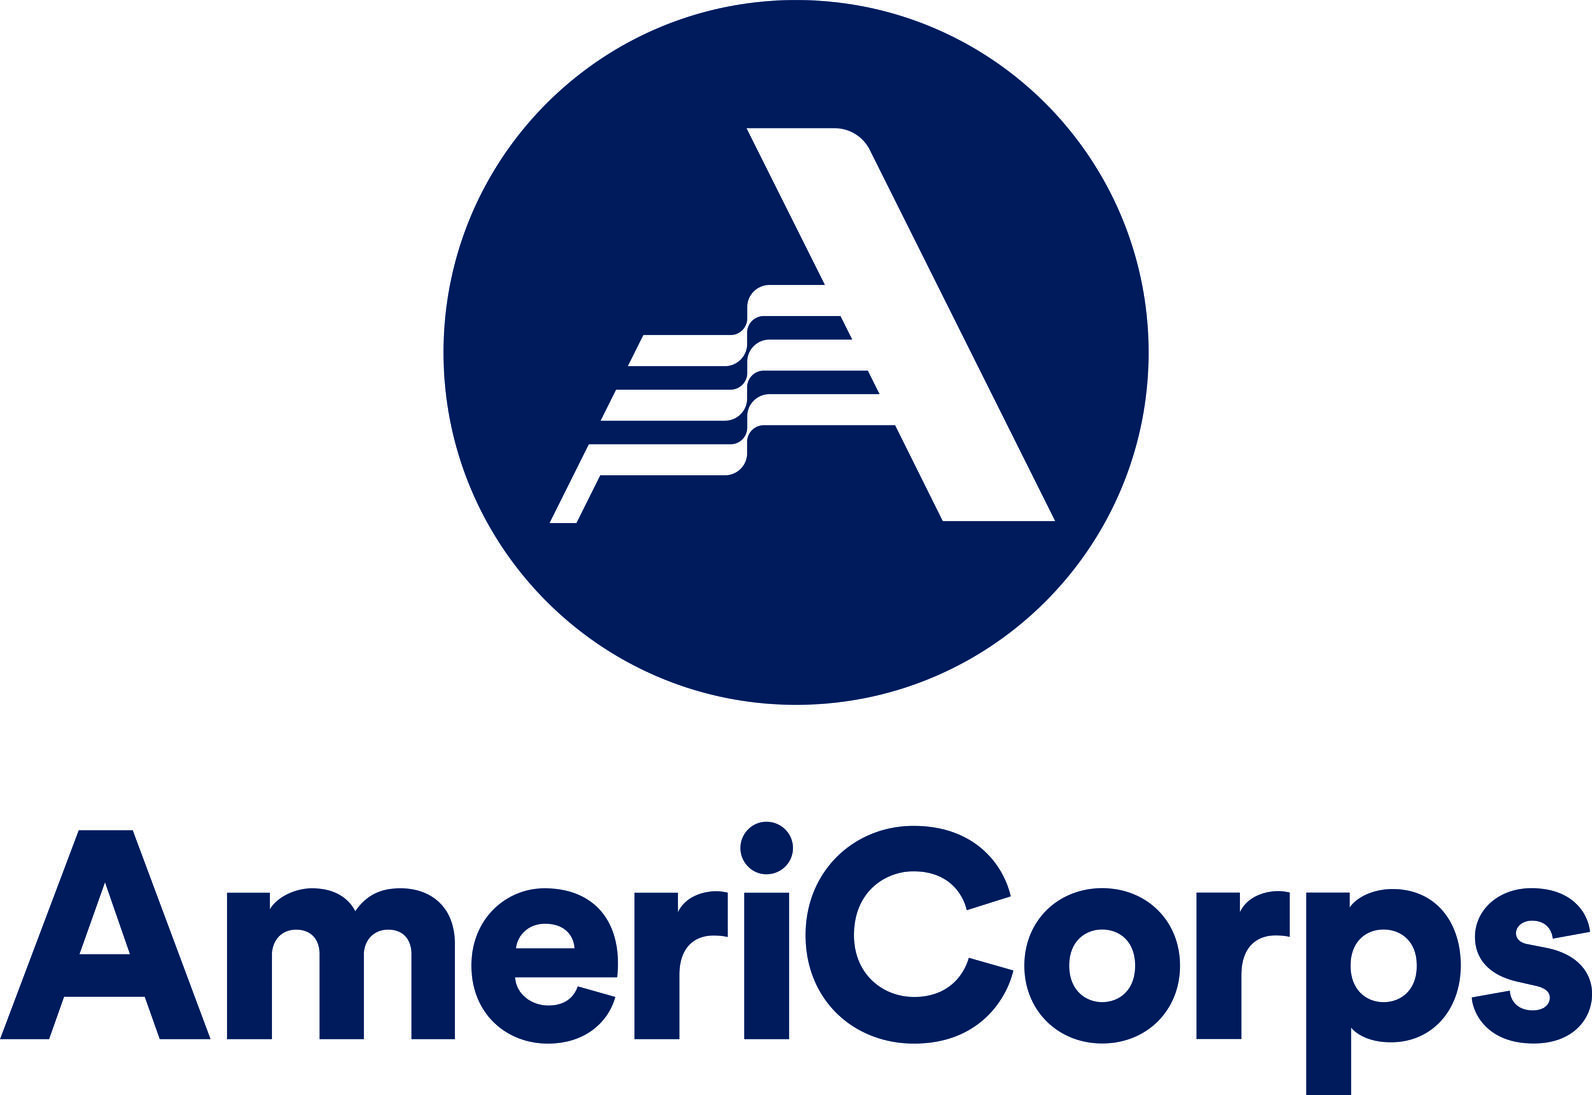 Small AmeriCorps logo, navy blue text on a white background